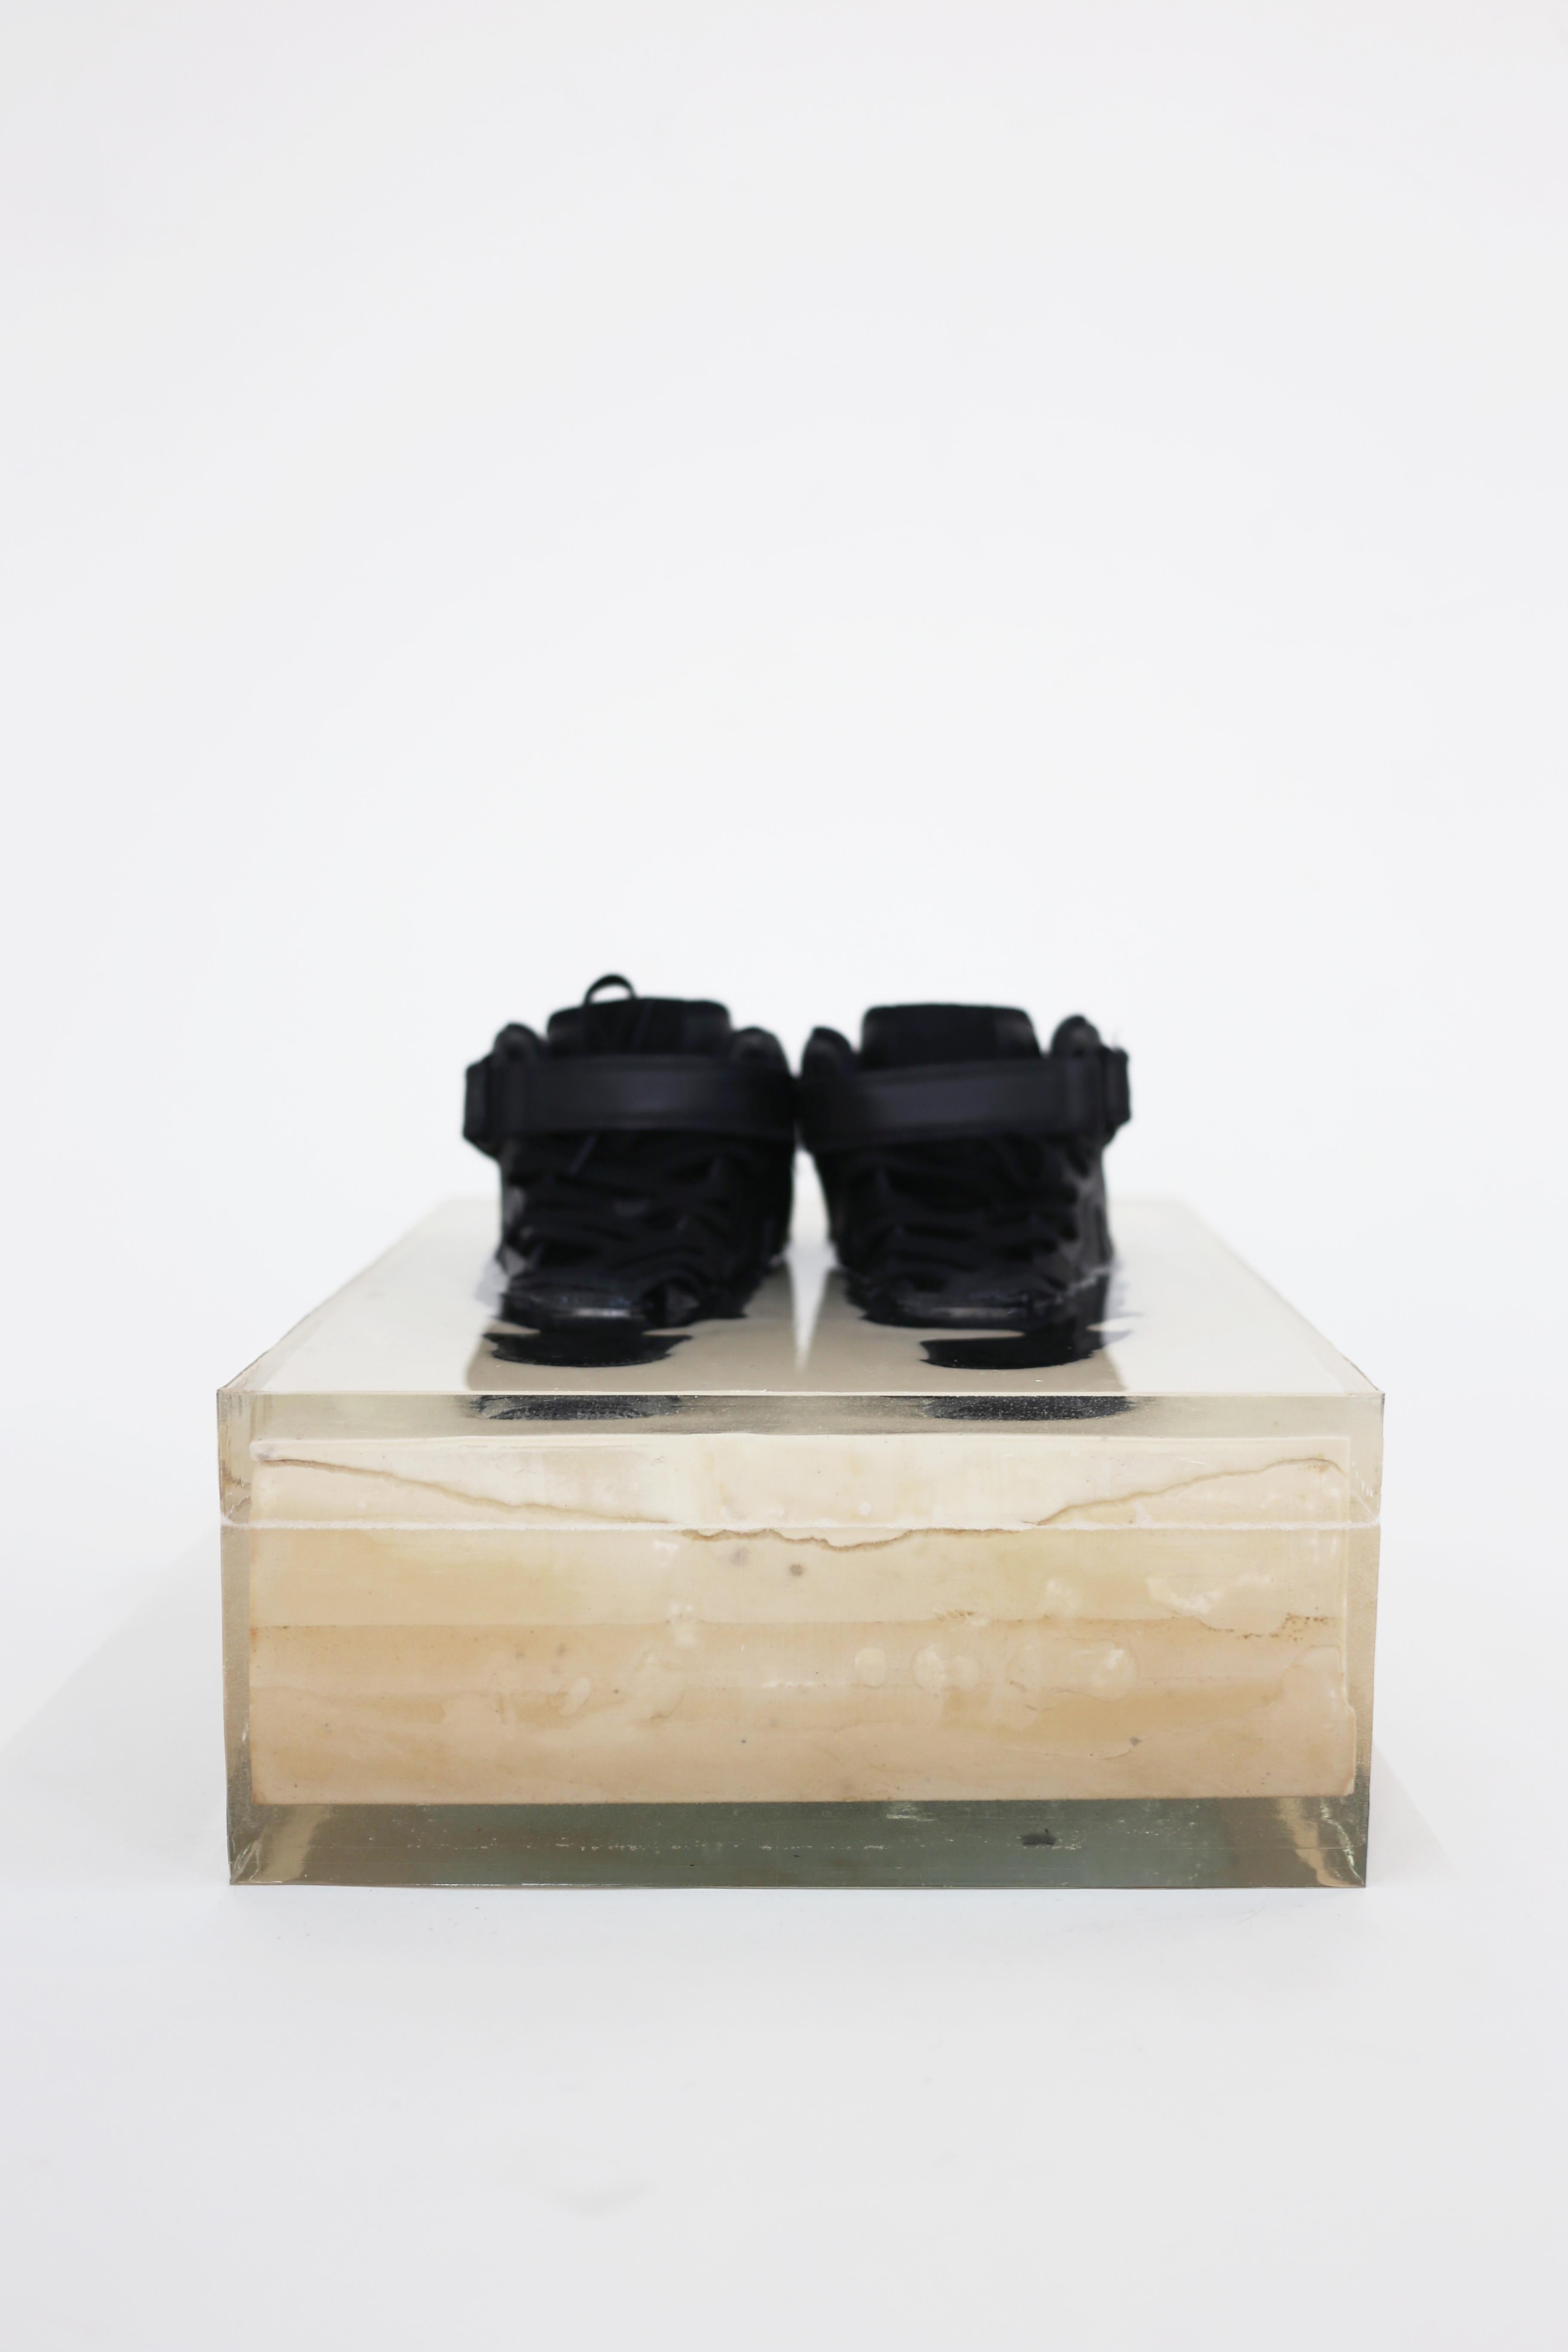 Material Lust [American, b.1981,1986]
ML190012, 2019
Shown in resin, plaster, leather, cotton and nylon 
Measures: 9